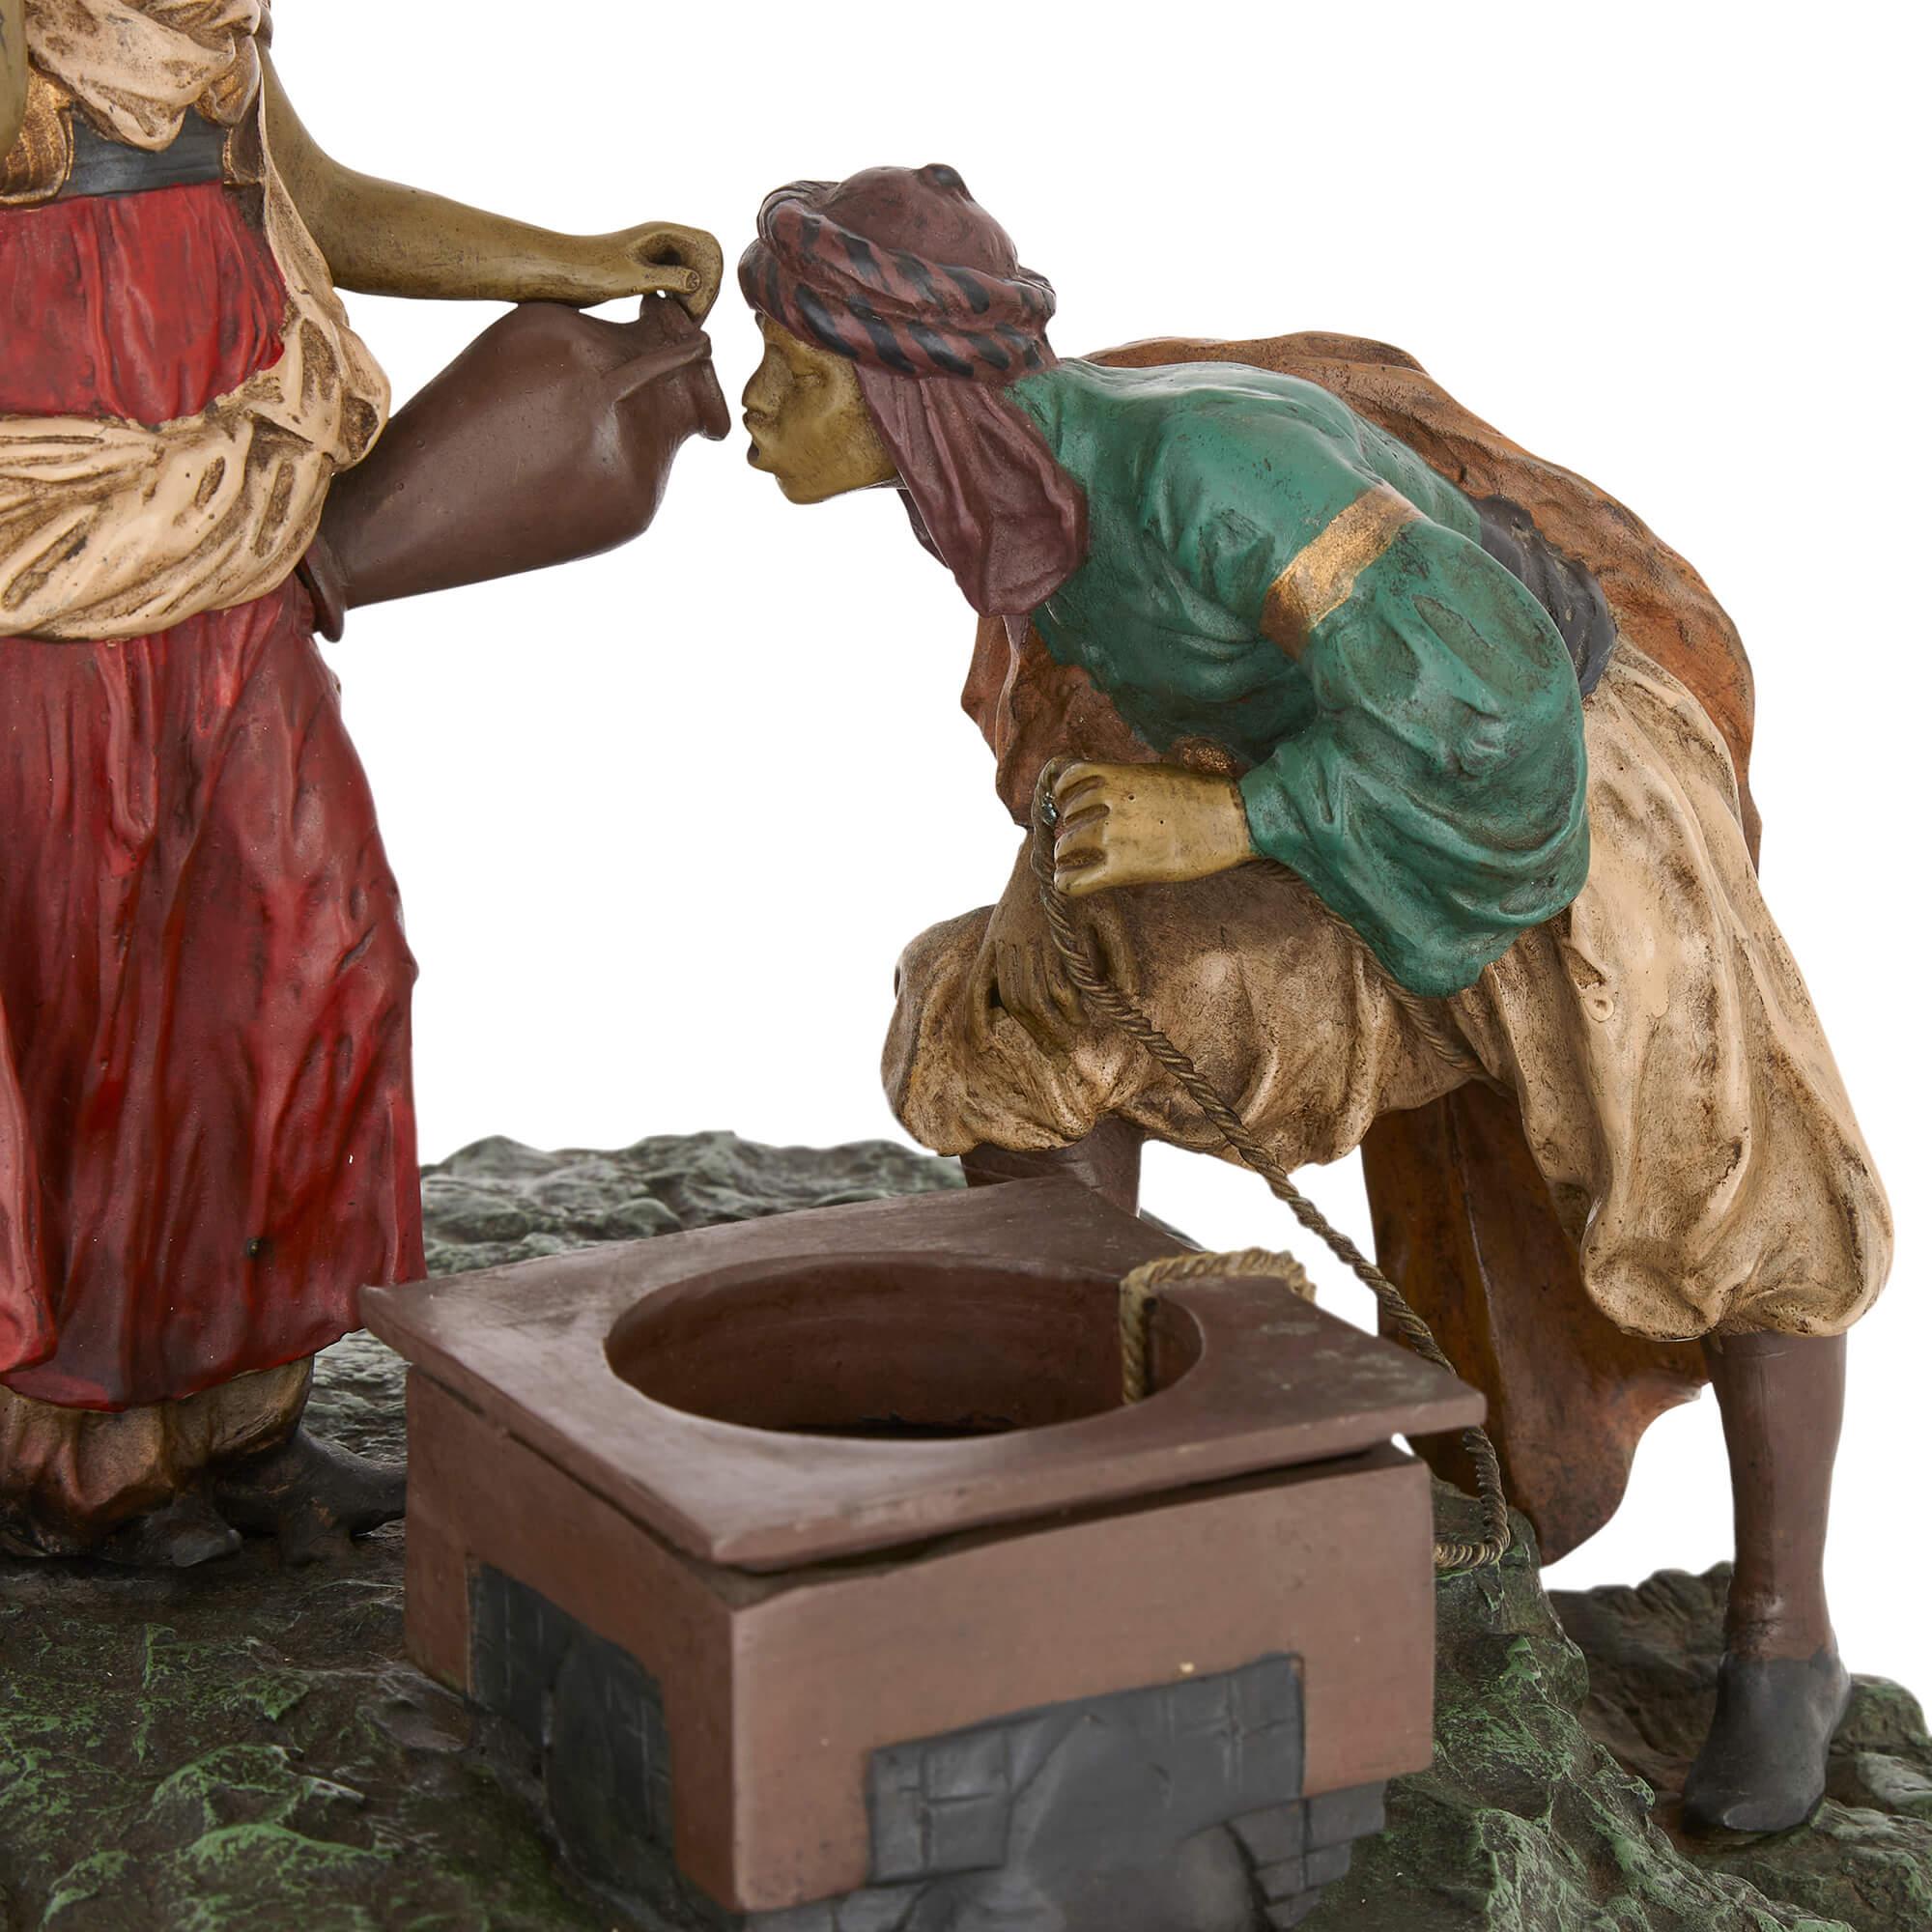 Viennese cold-painted bronze by Bergman depicting Rebecca at the well
Austria, c. 1910
Height 30cm, width 30cm, depth 30cm

This figural bronze replicates the biblical story of Rebecca at the well (Genesis 24:11-22), where Rebecca’s selfless act of